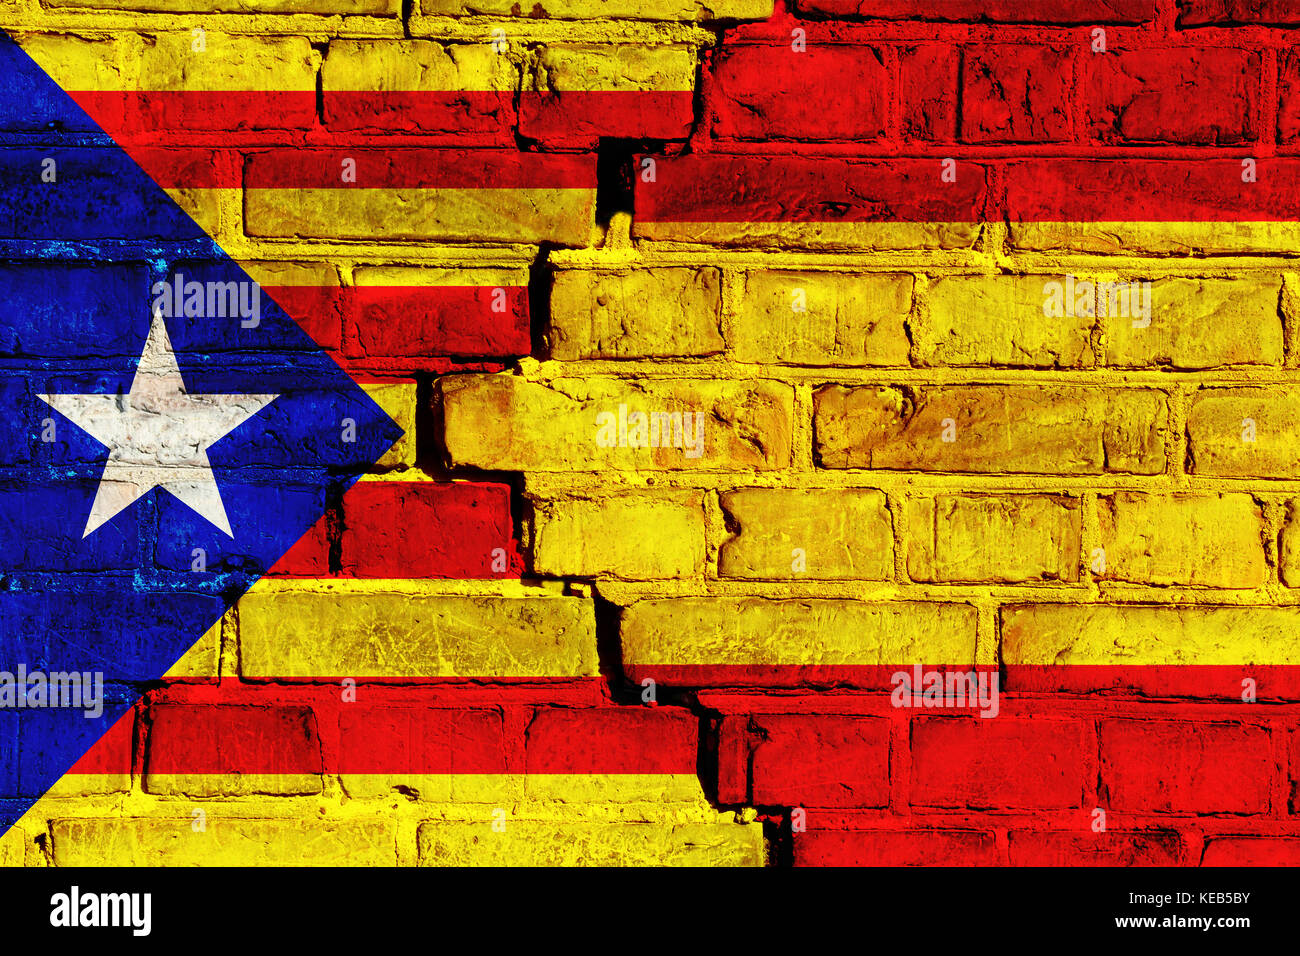 Catalonia independence movement versus Spain central government: symbolic for ongoing dispute on separation and autonomy. Flags of Catalan separatism  Stock Photo